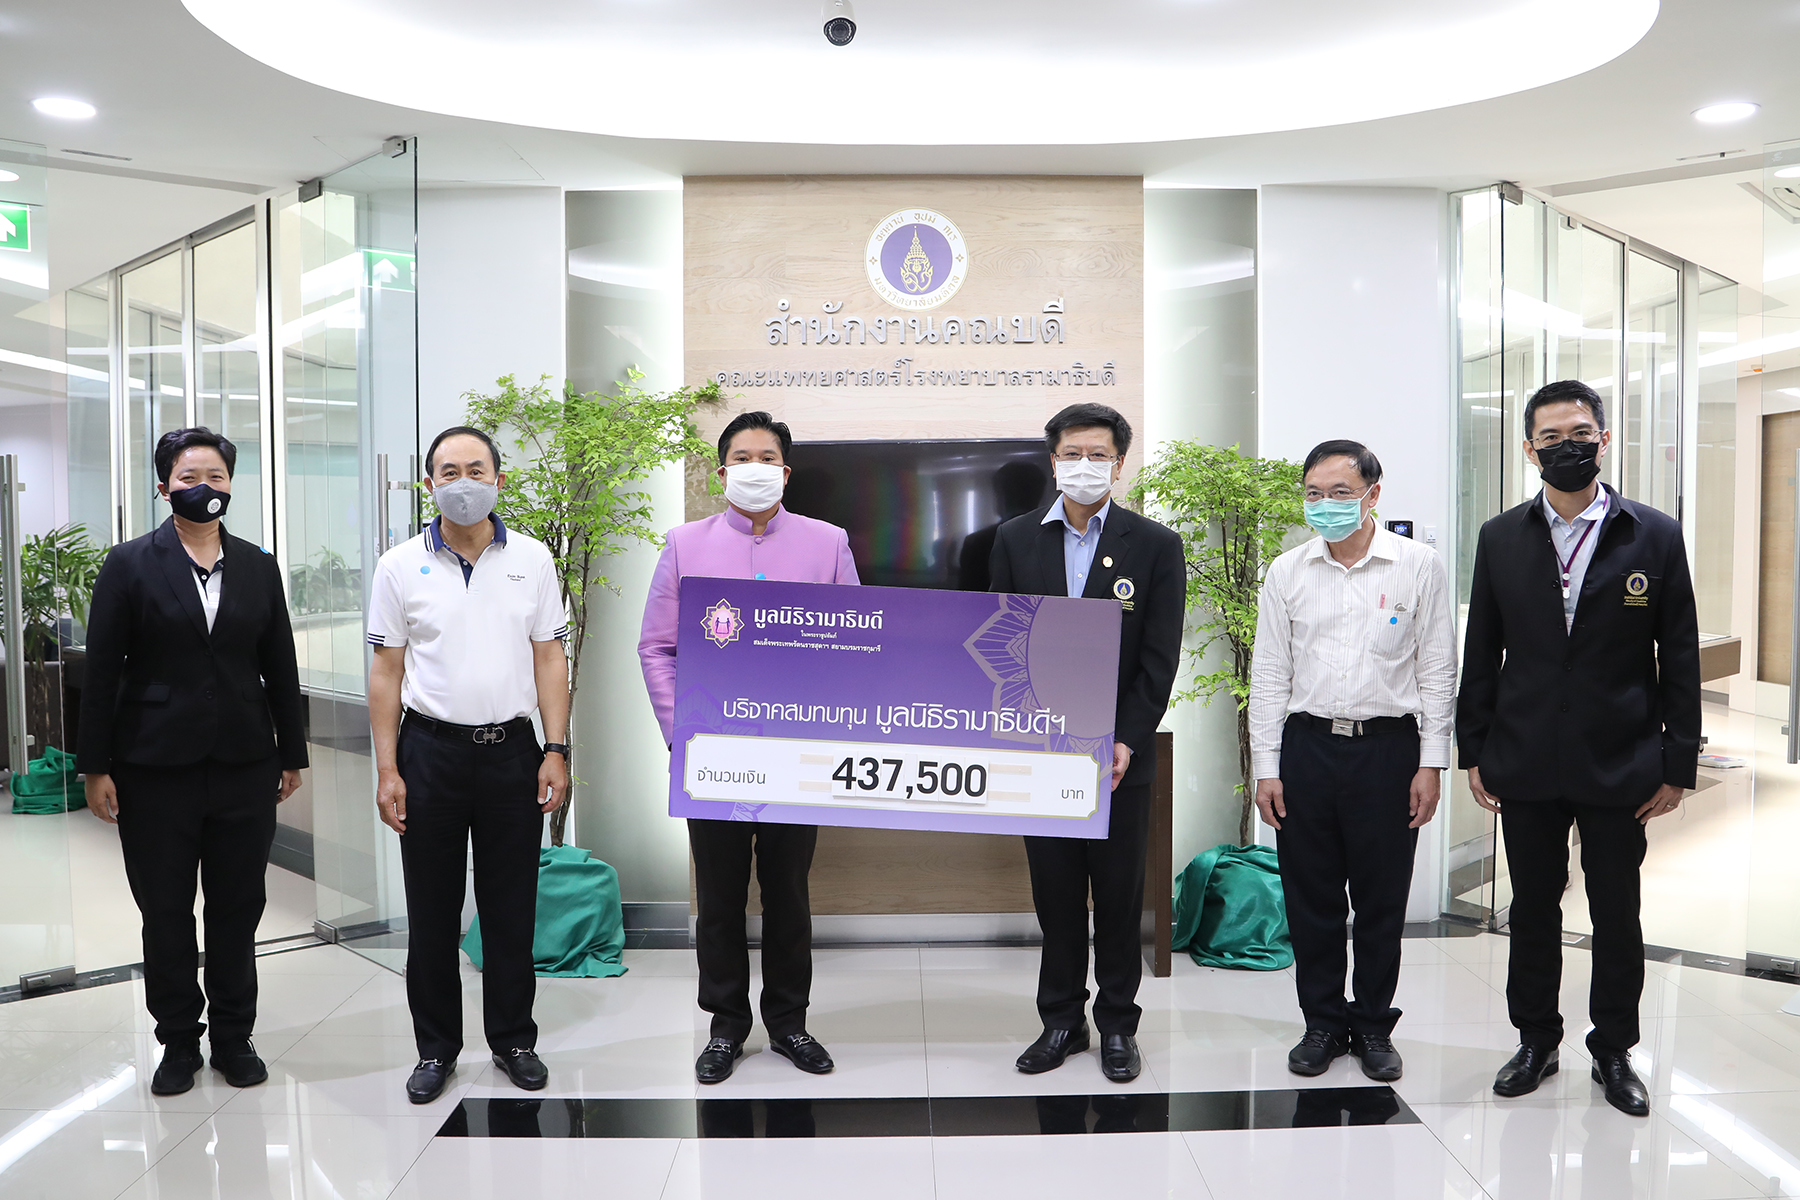 EXIM Thailand Supports Faculty of Medicine, Ramathibodi Hospital’s Fund for Purchase of Medical Equipment to Combat COVID-19